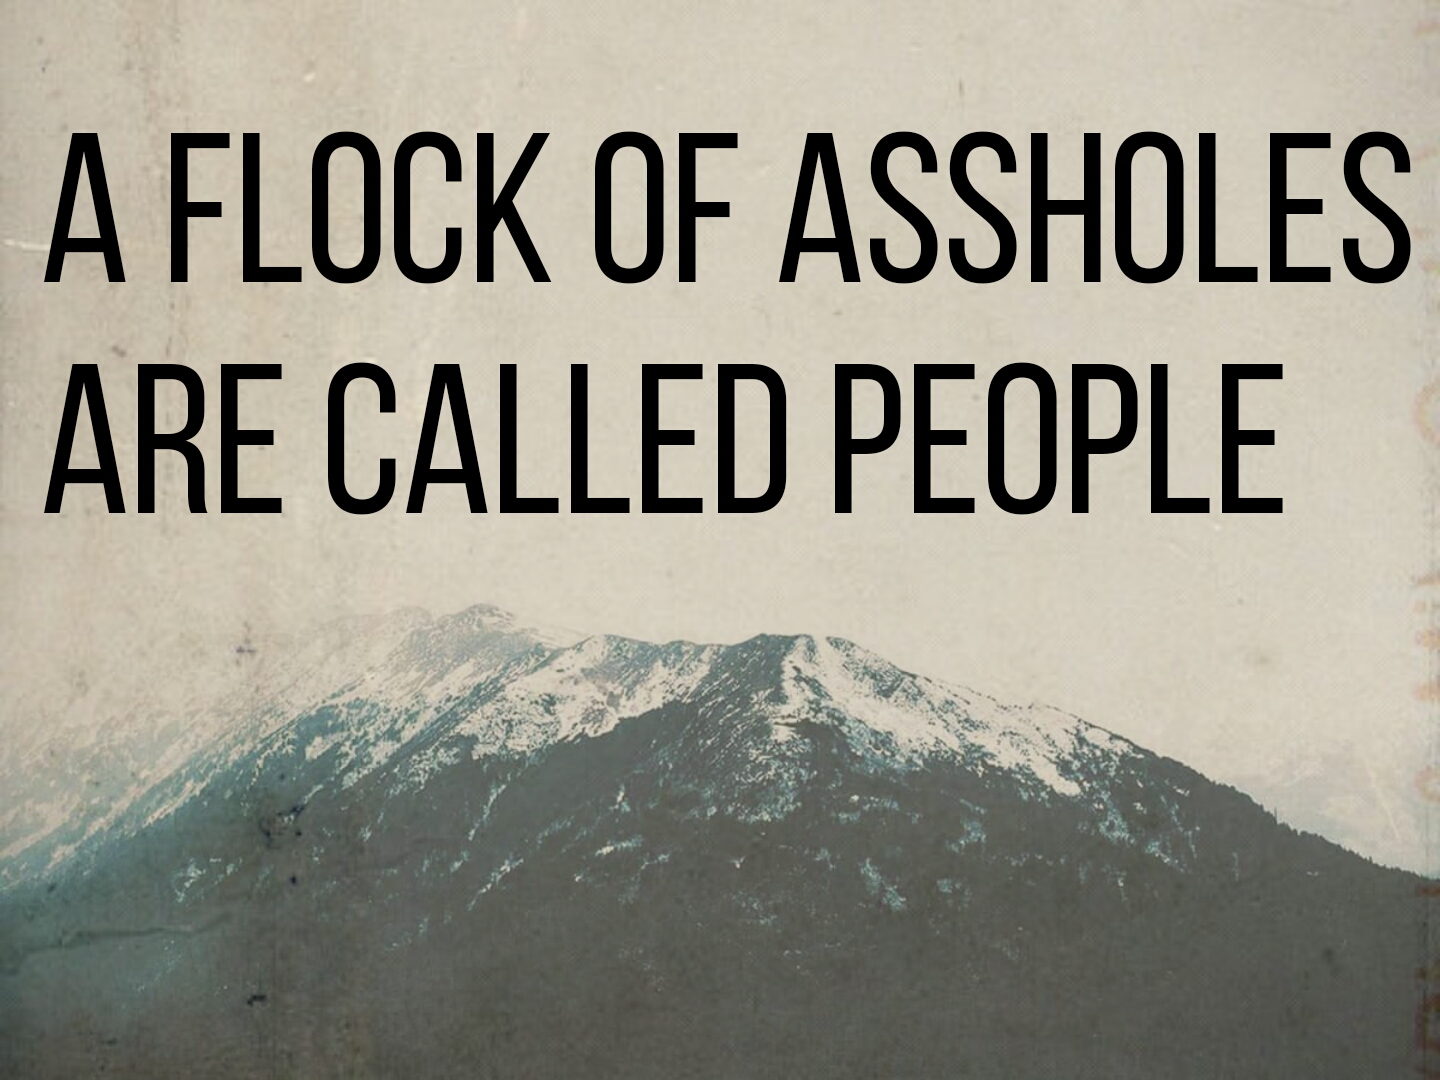 sky - A Flock Of Assholes Are Called People